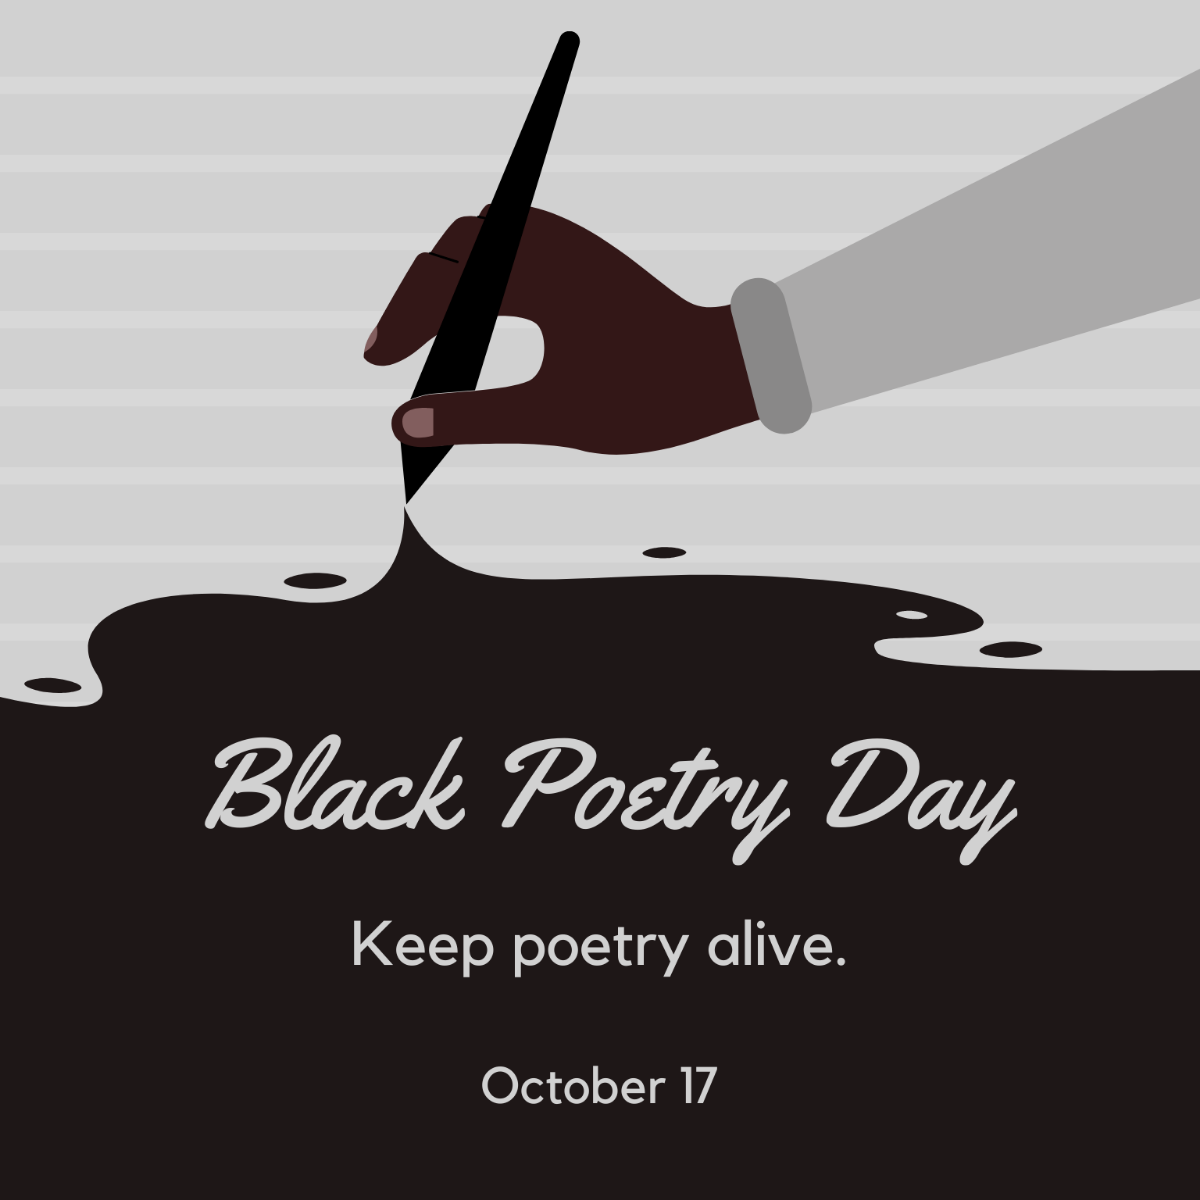 Black Poetry Day Poster Vector Template